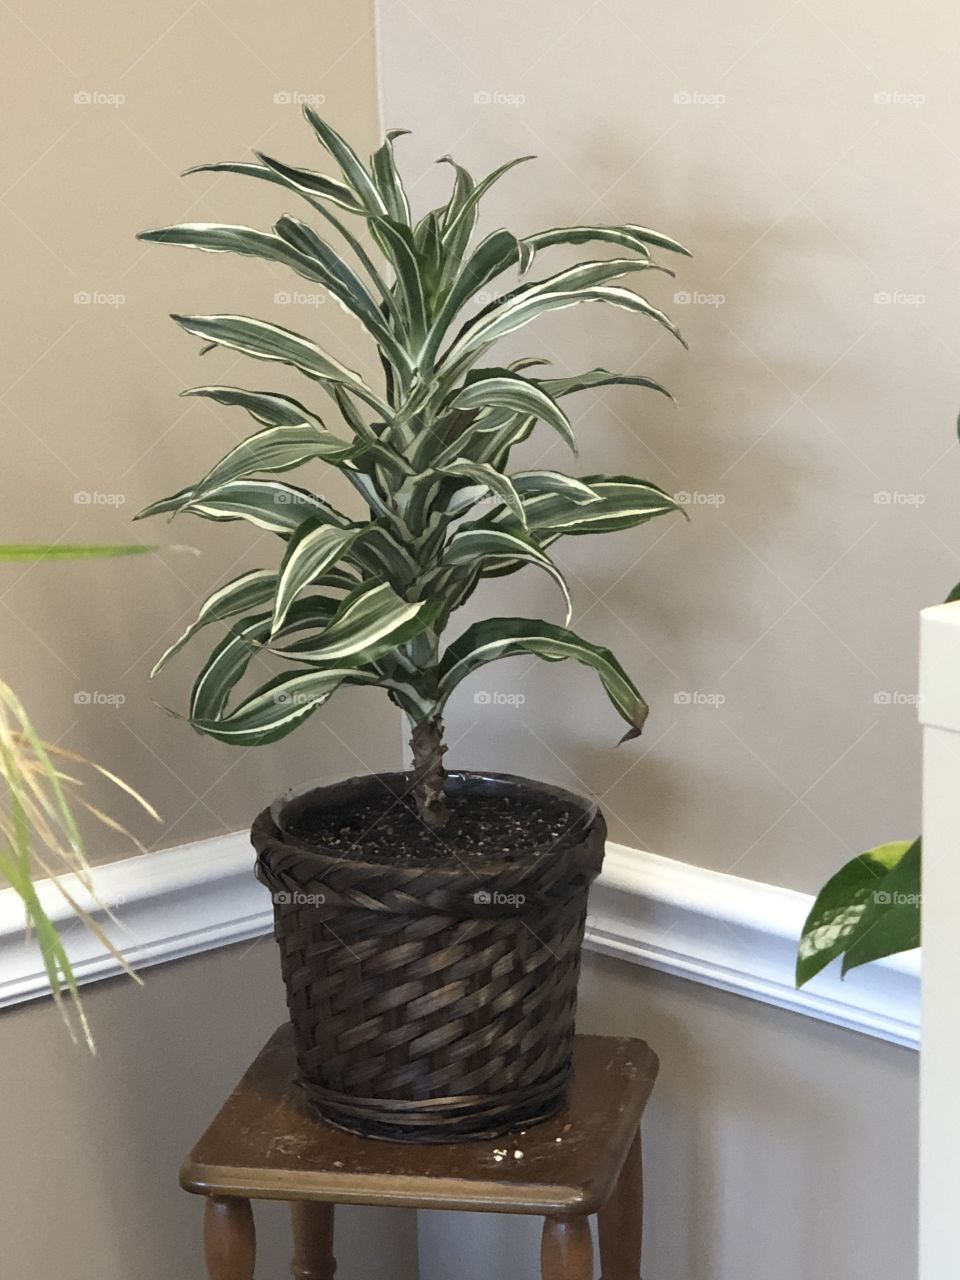 Variegated house plant